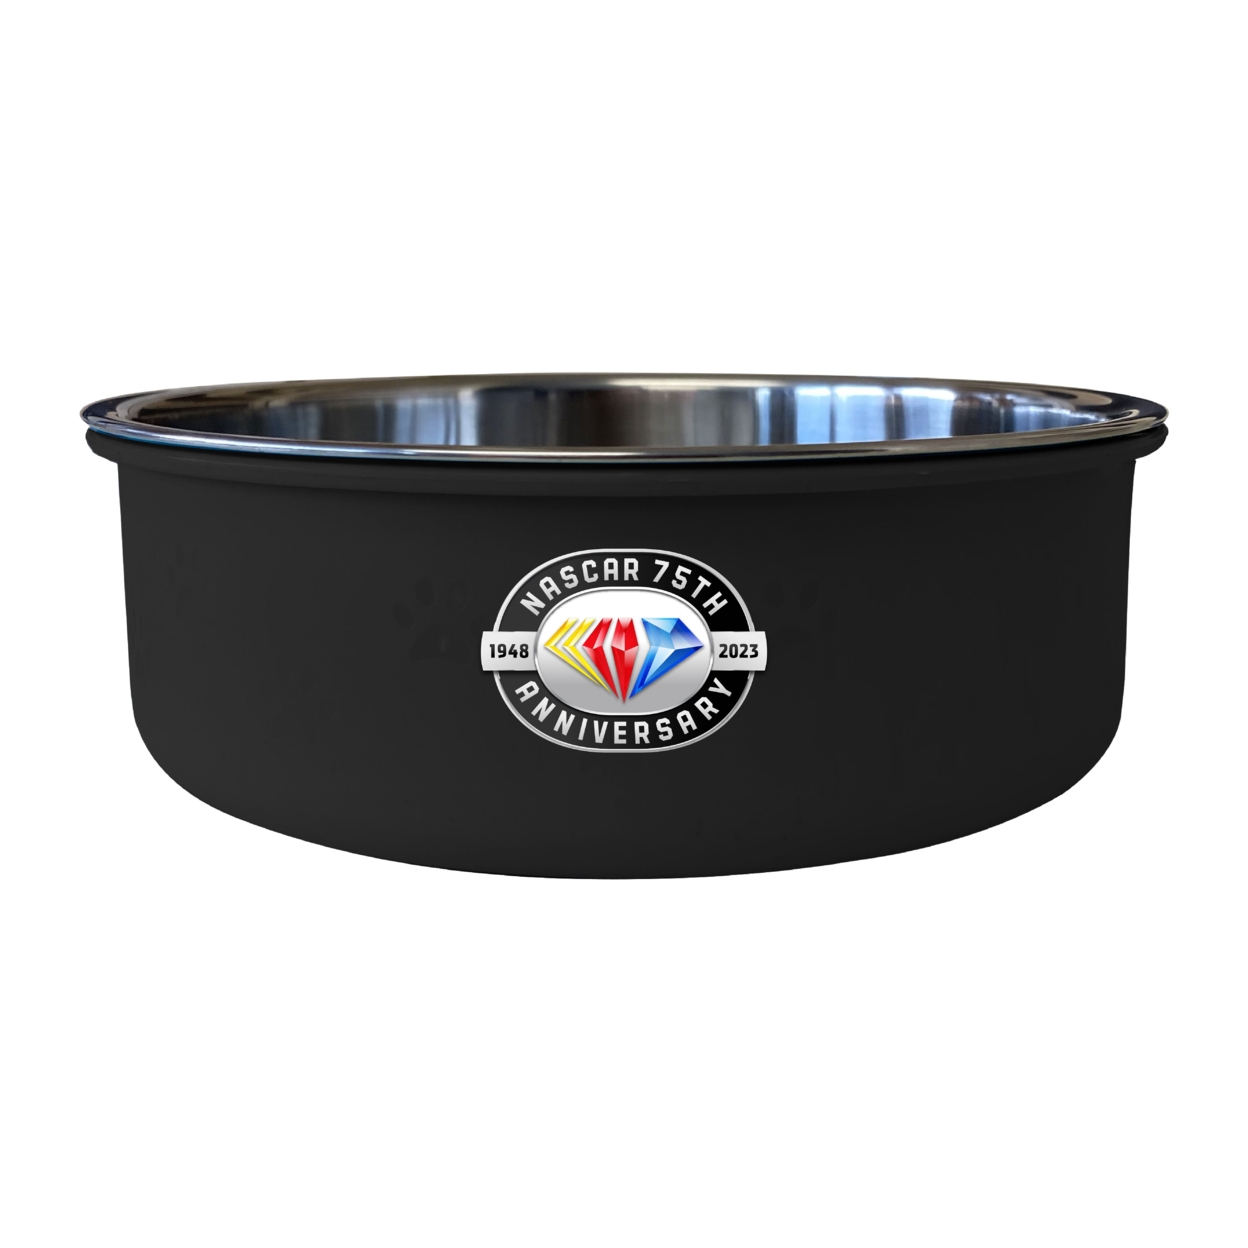 NASCAR 75 Year Anniversary Officially Licensed 5x2.25 Pet Bowl